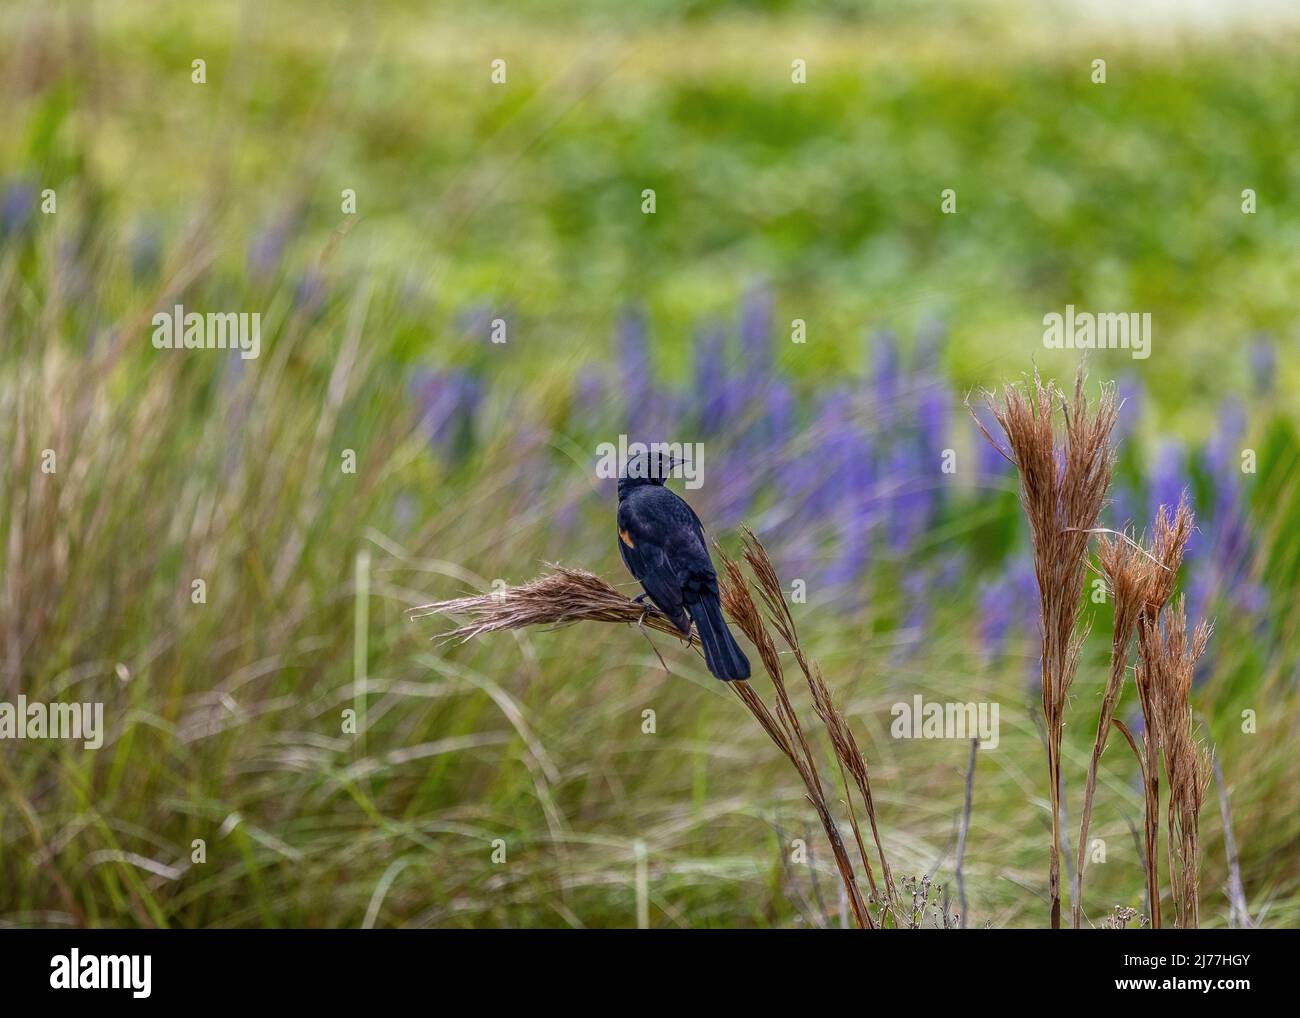 Red-winged blackbird in front of purple wildflowers Stock Photo